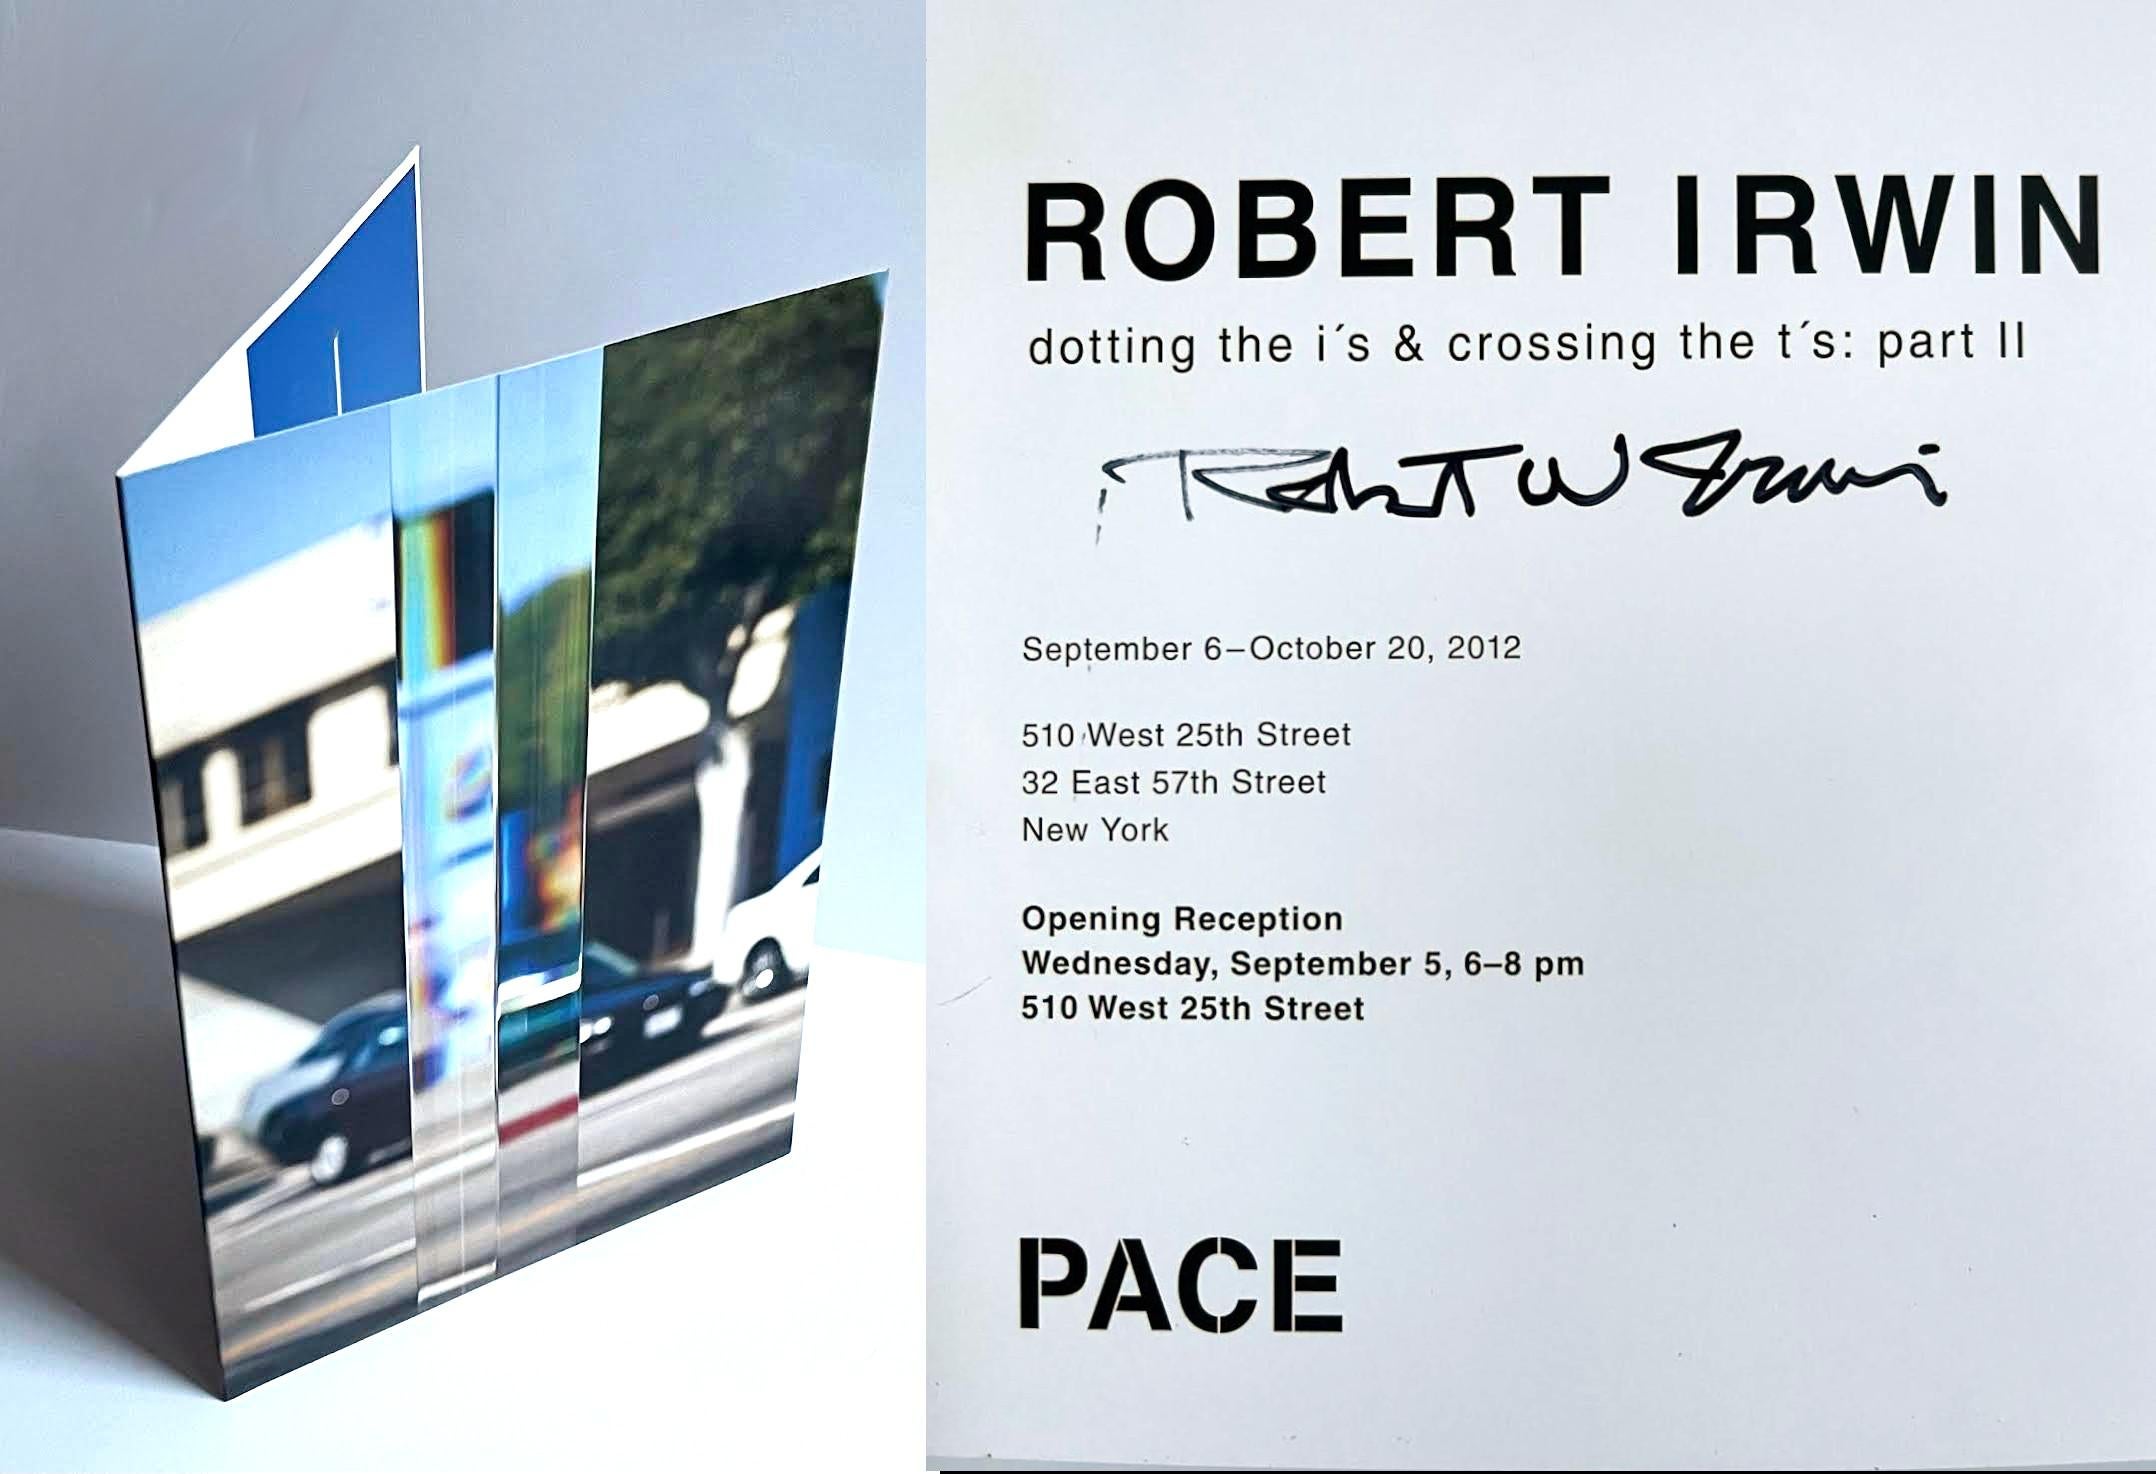 Robert Irwin
Fold-out PACE Gallery invitation (hand signed by Robert Irwin), 2012
Offset lithograph fold-out invitation (hand signed by Robert Irwin)
Boldly signed by Robert Irwin on the inside
10 × 7 inches
Makes a great gift!
This fold out